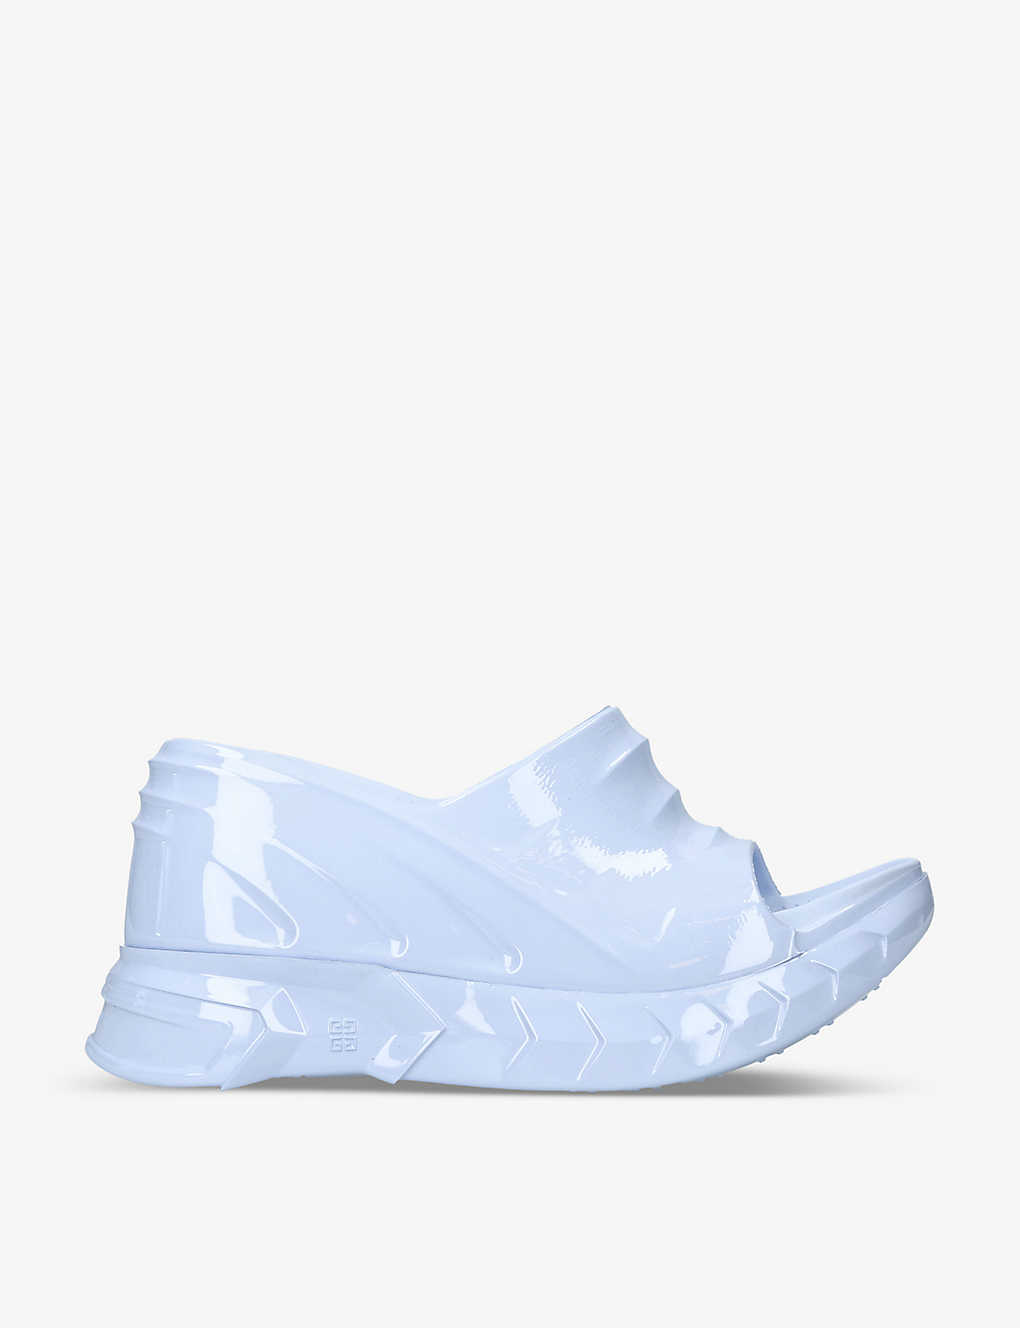 Givenchy Marshmallow Wedge Sandals In Cloud Blue